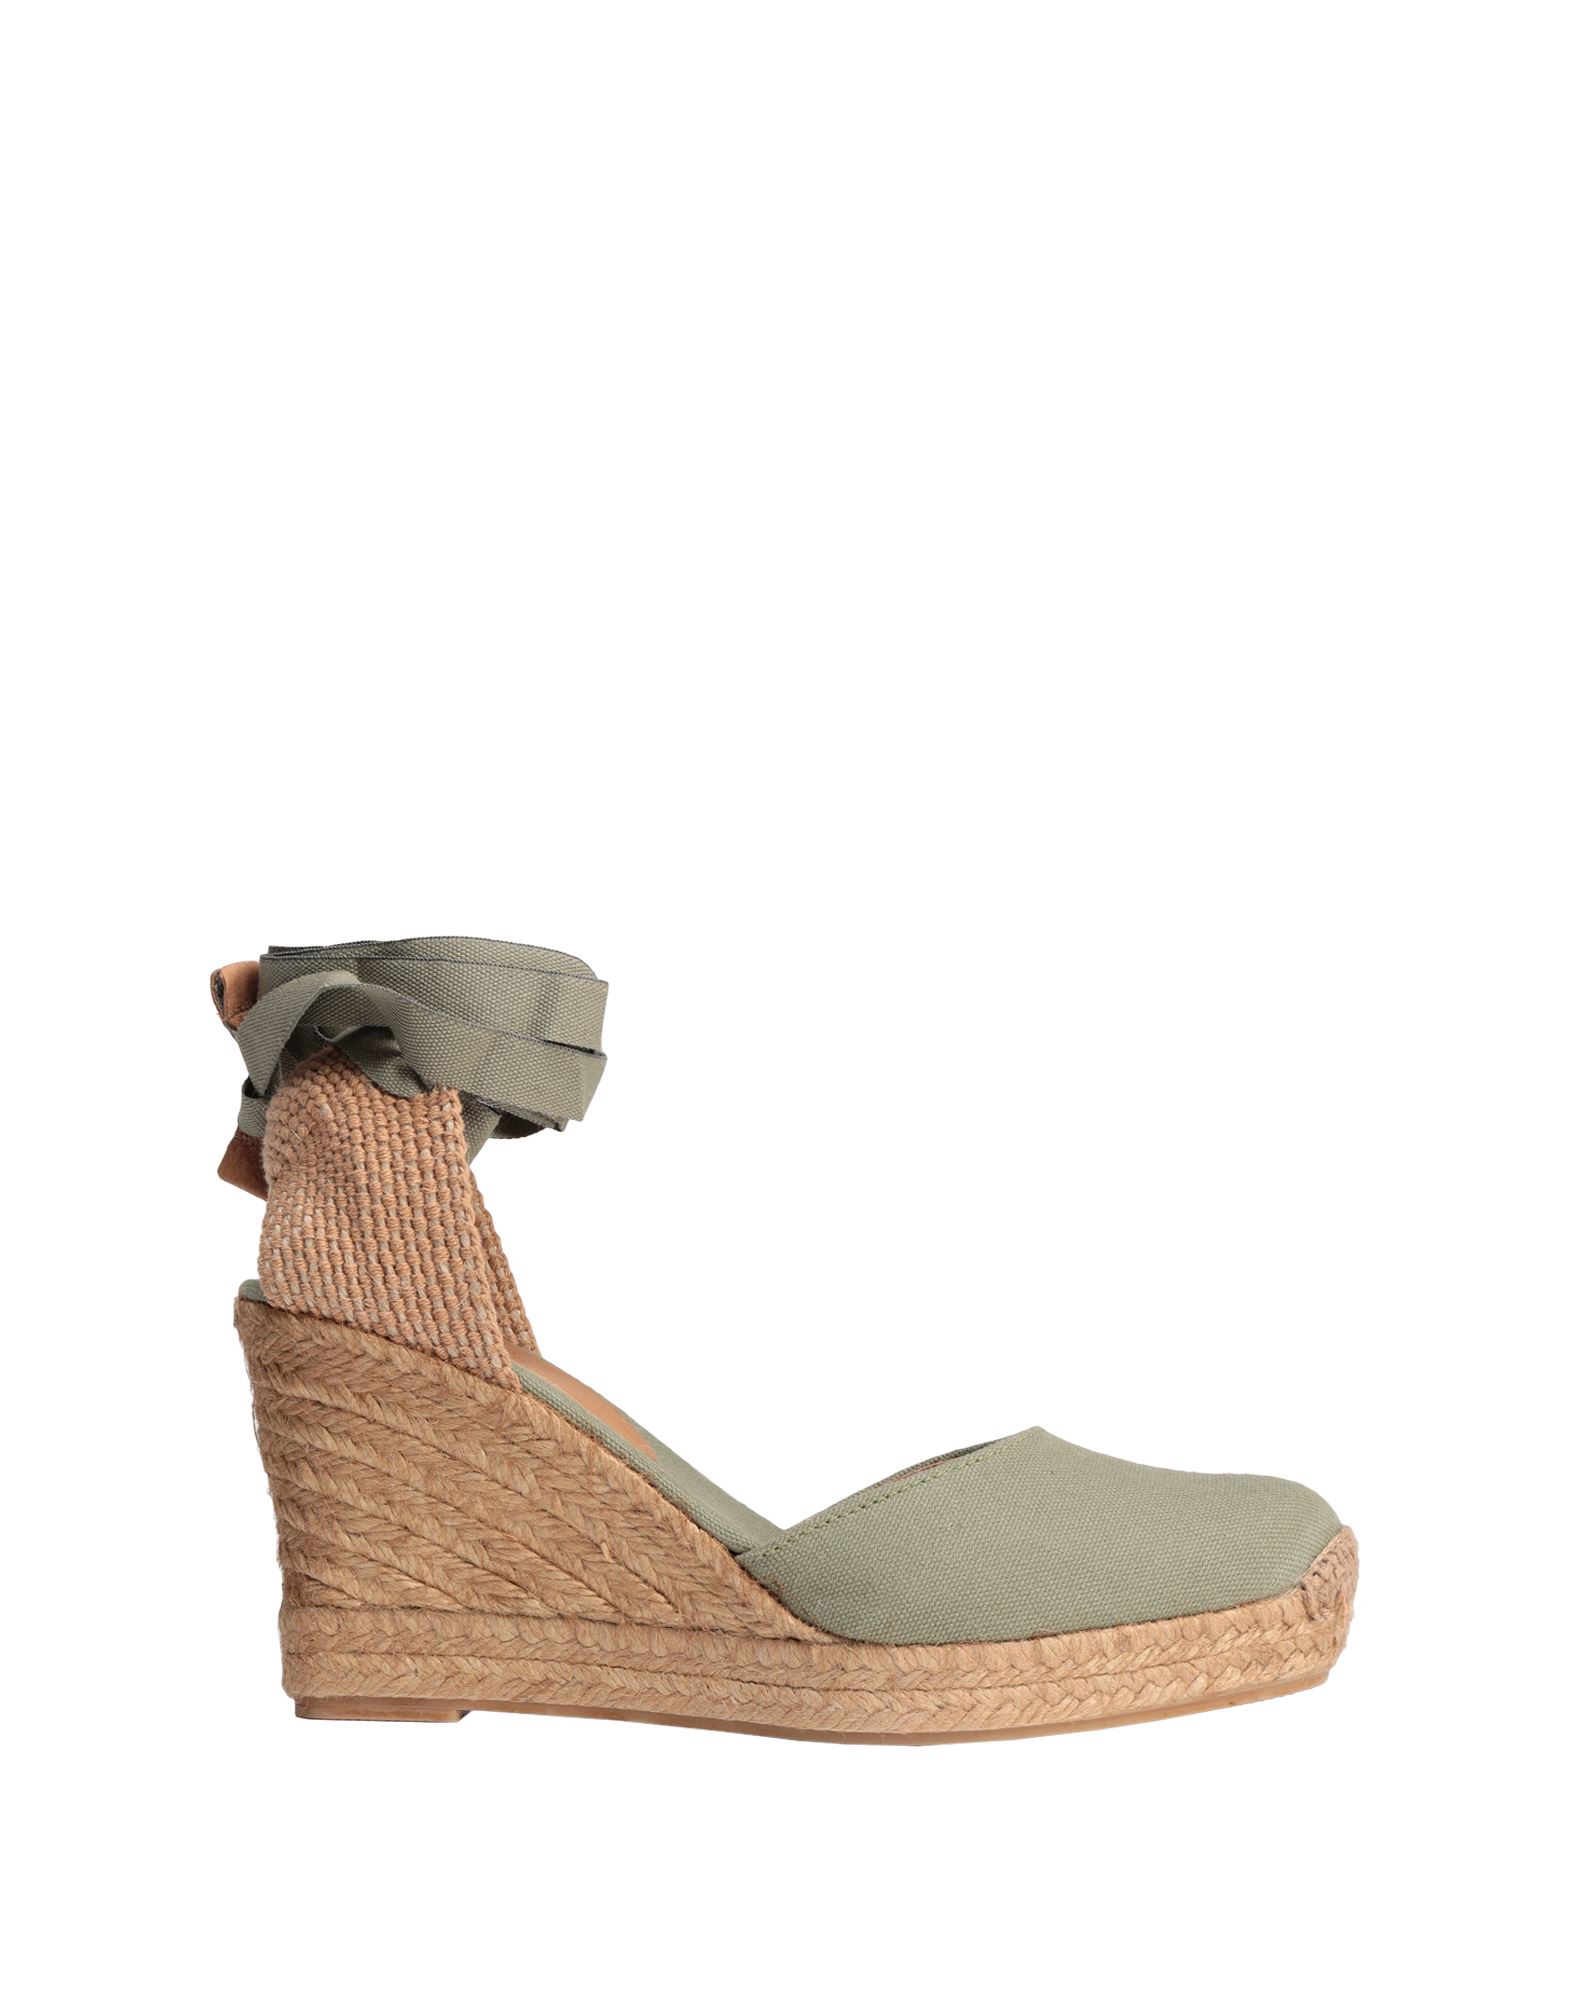 8 By Yoox Espadrilles In Military Green